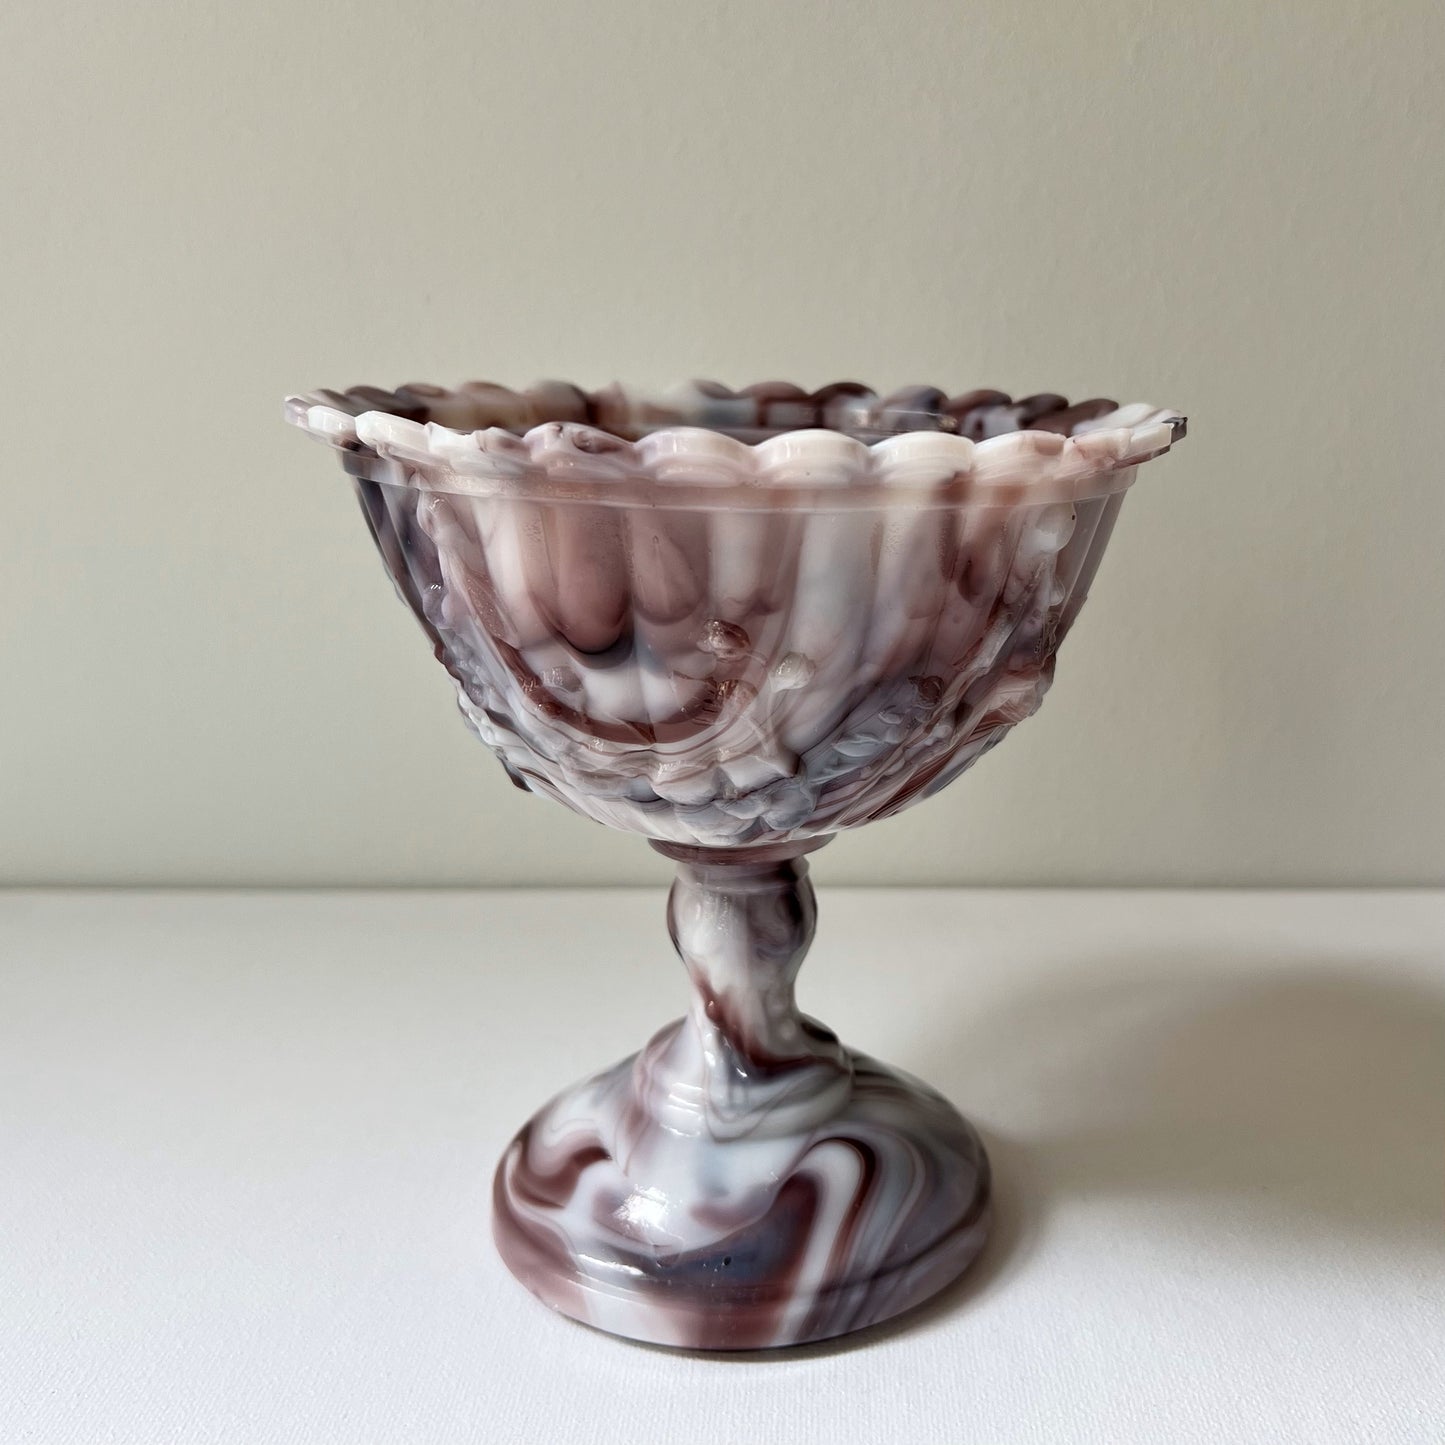 【Vintage】France - 1930s Marble Milk Glass Candy Dish